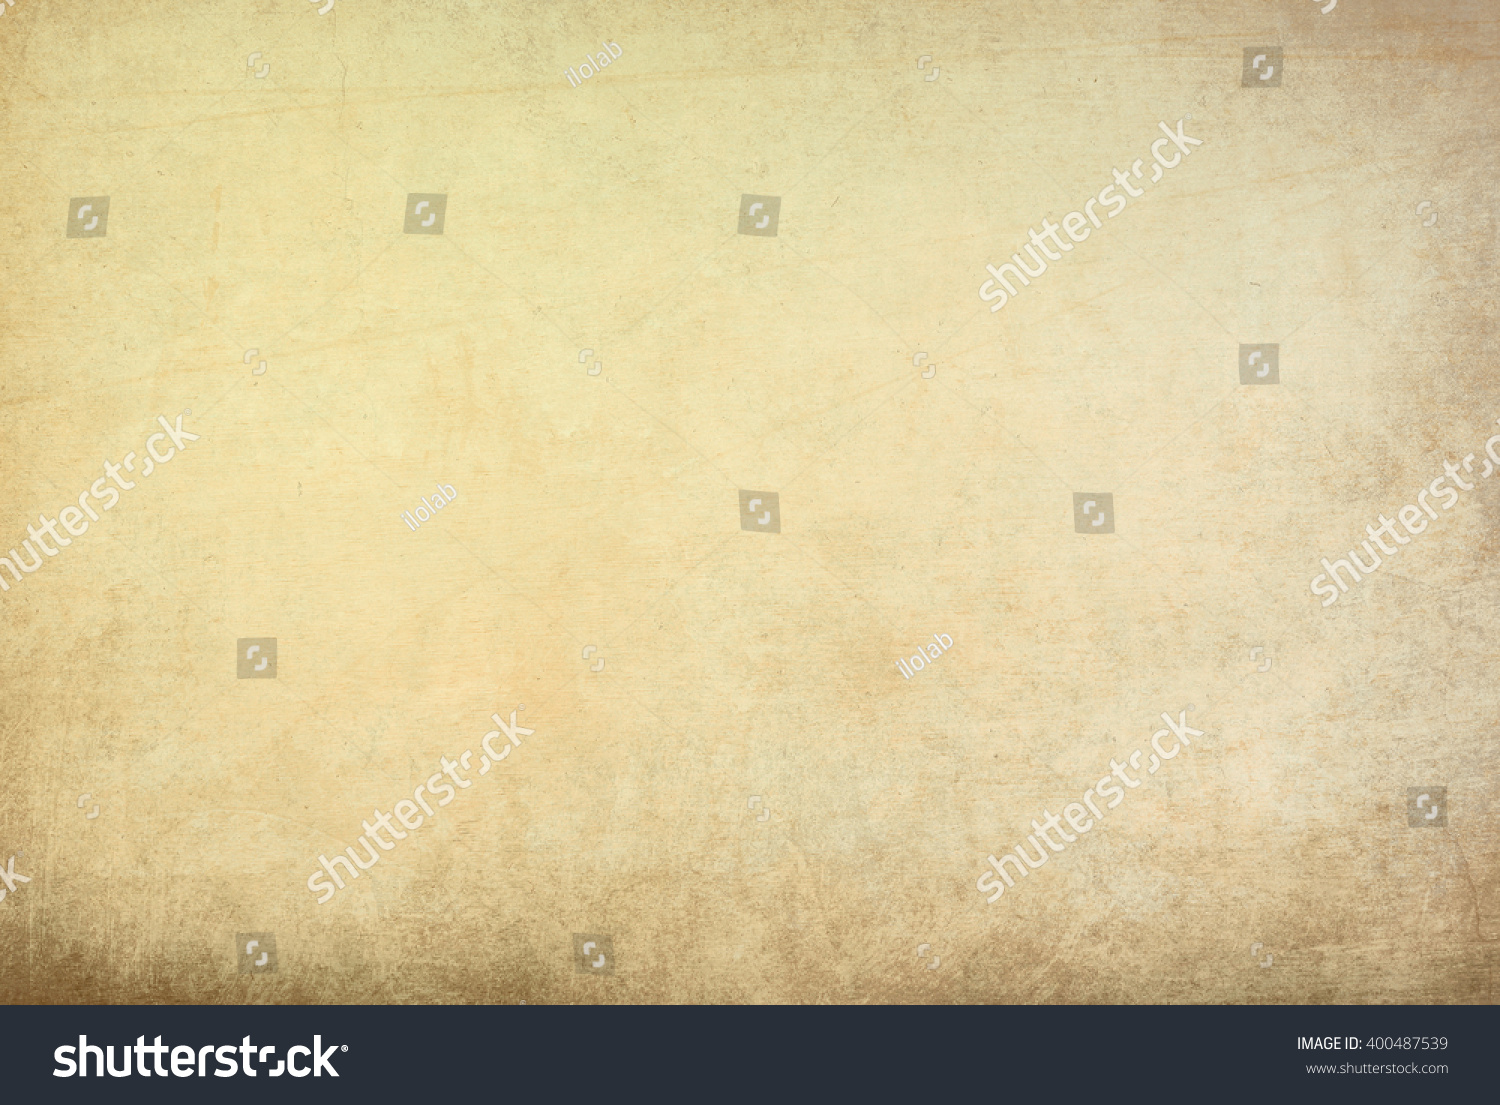 large grunge textures and backgrounds - perfect background  #400487539